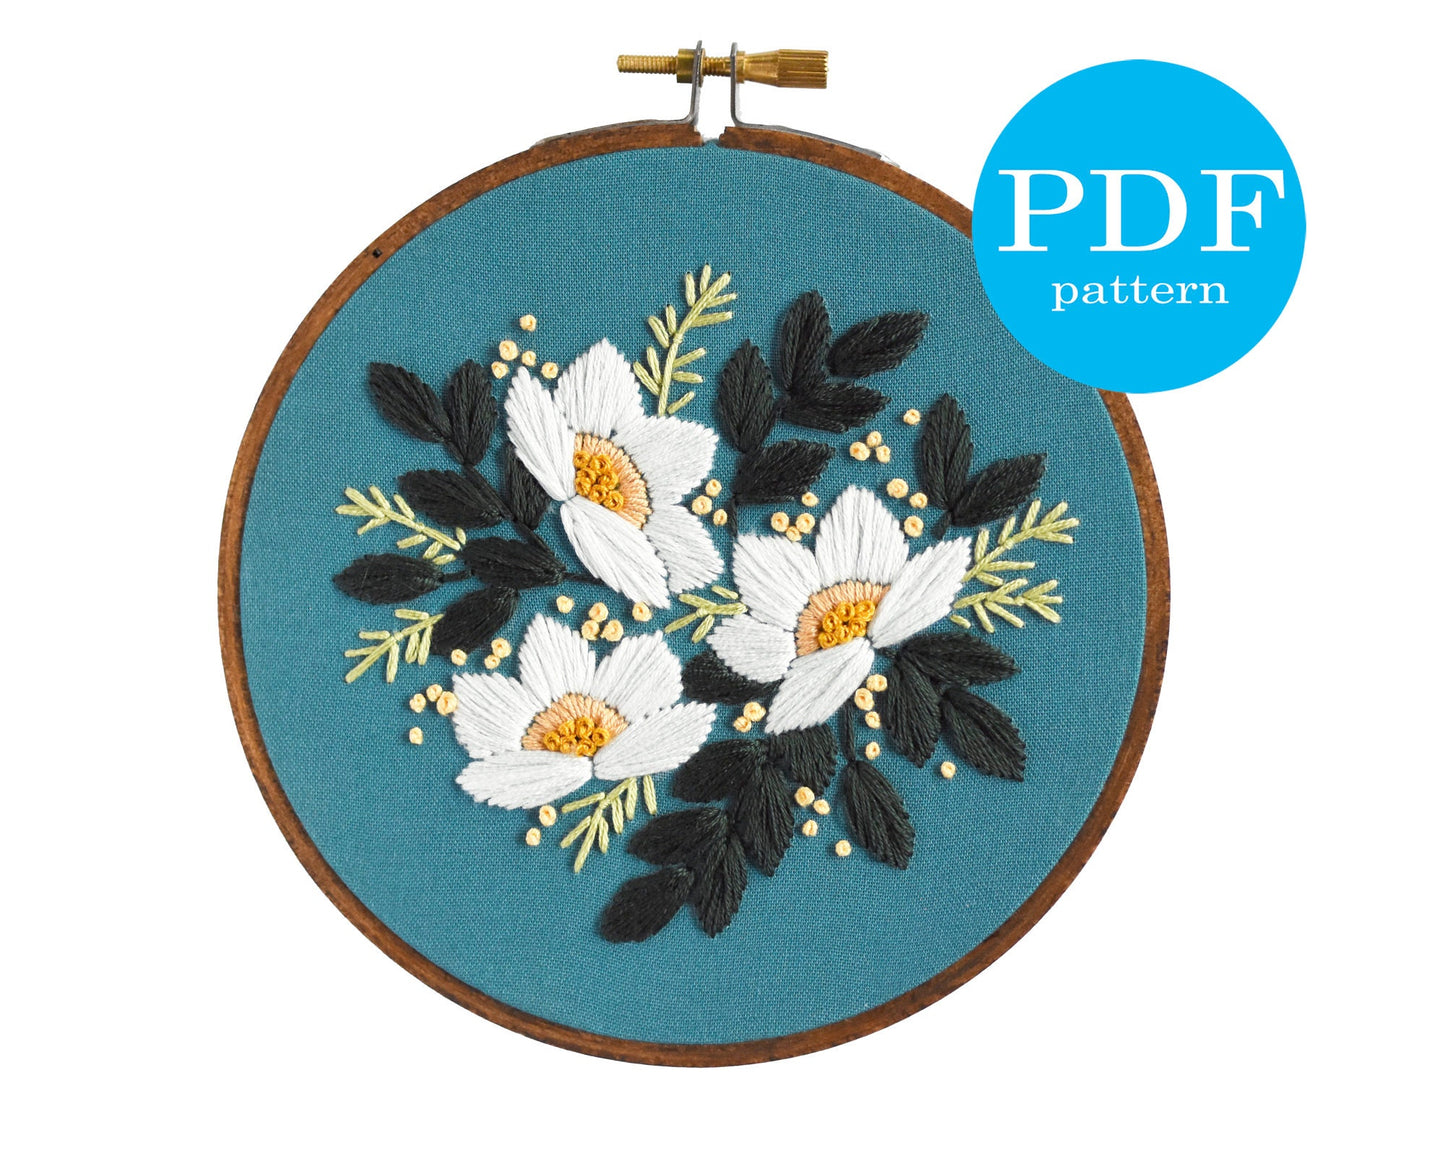 Magnolia Blossoms Embroidery Pattern. Beginner Embroidery. PDF embroidery pattern. 5" hoop. Floral Embroidery pattern. Embroidery pattern